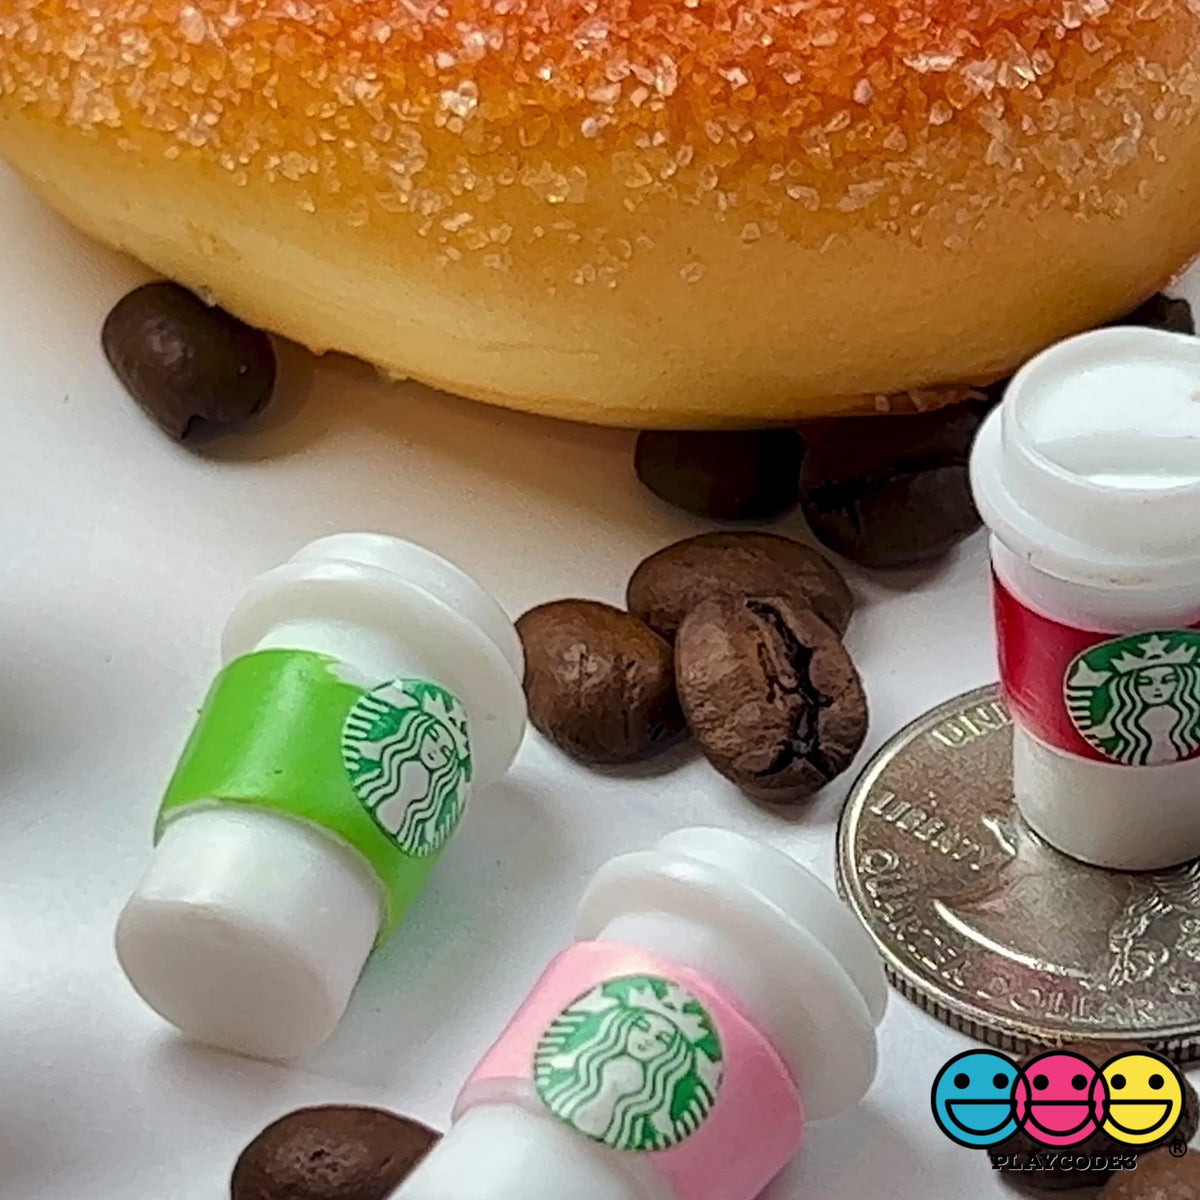 Coffee Cups Frozen Drink and Bottles Miniature Charms Cabochons 10